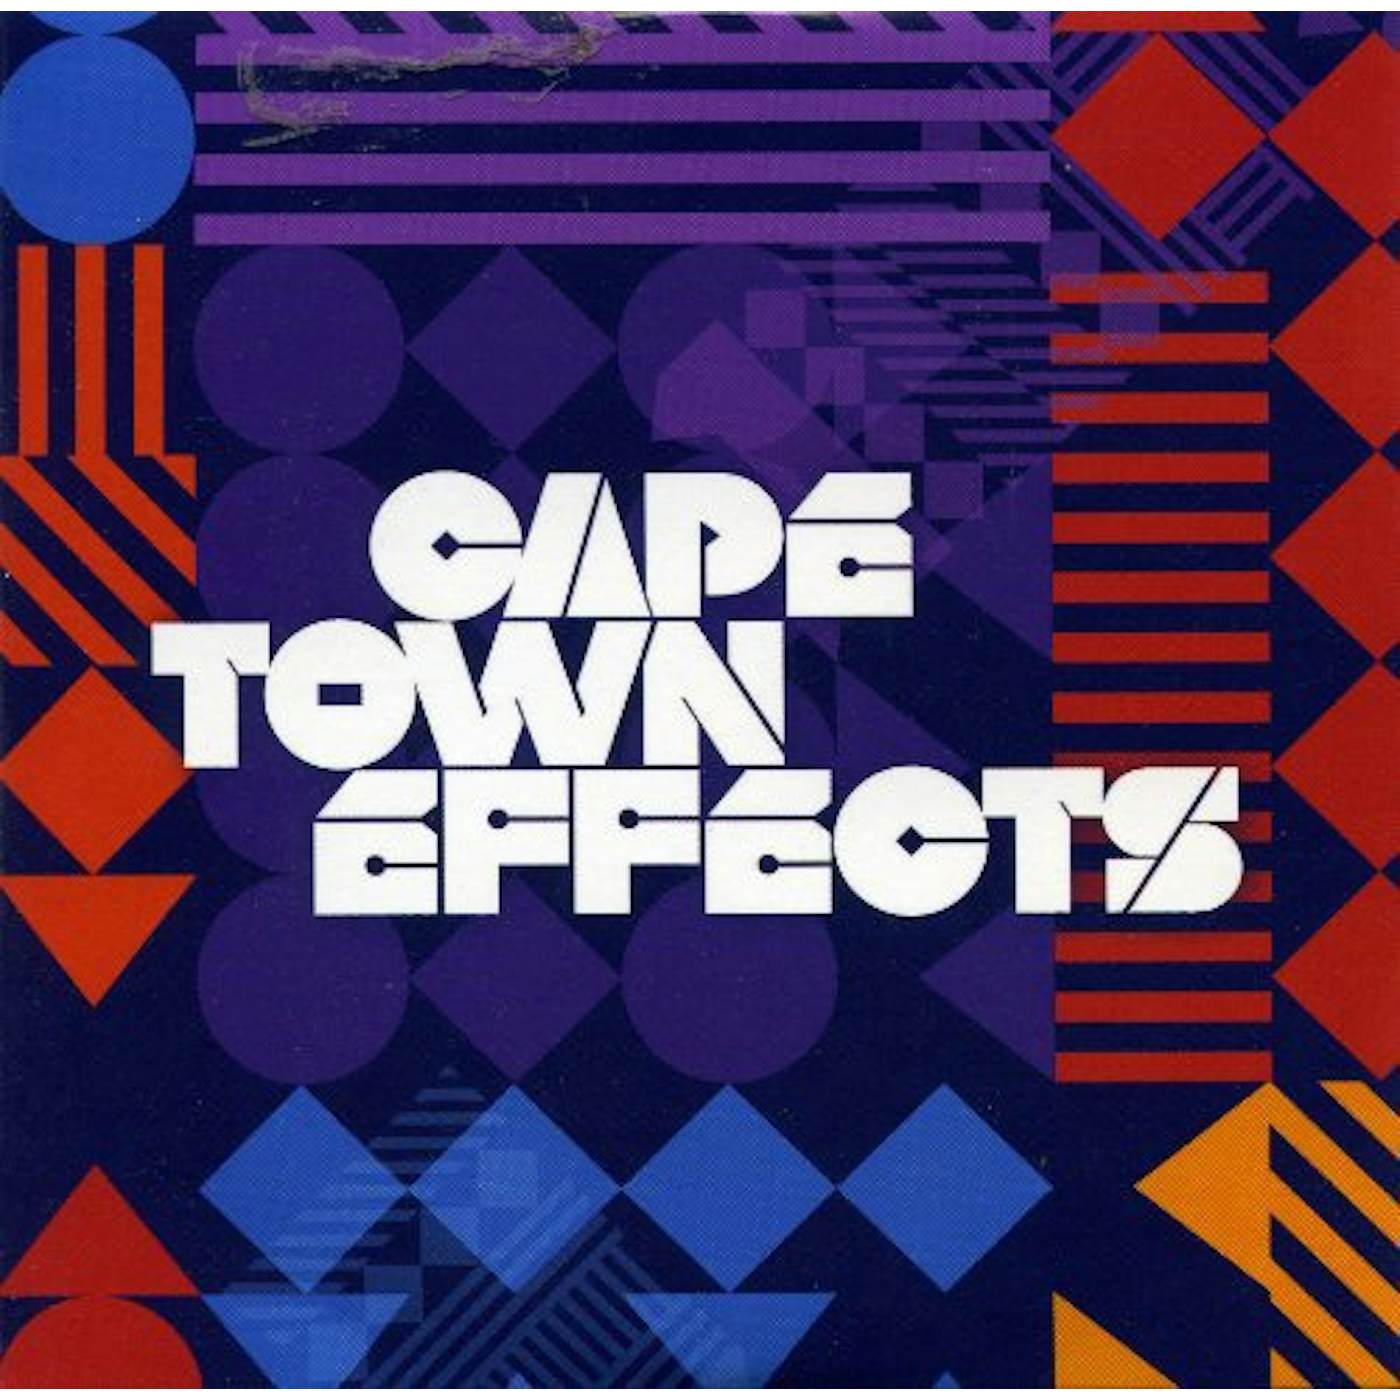 Cape Town Effects Vinyl Record